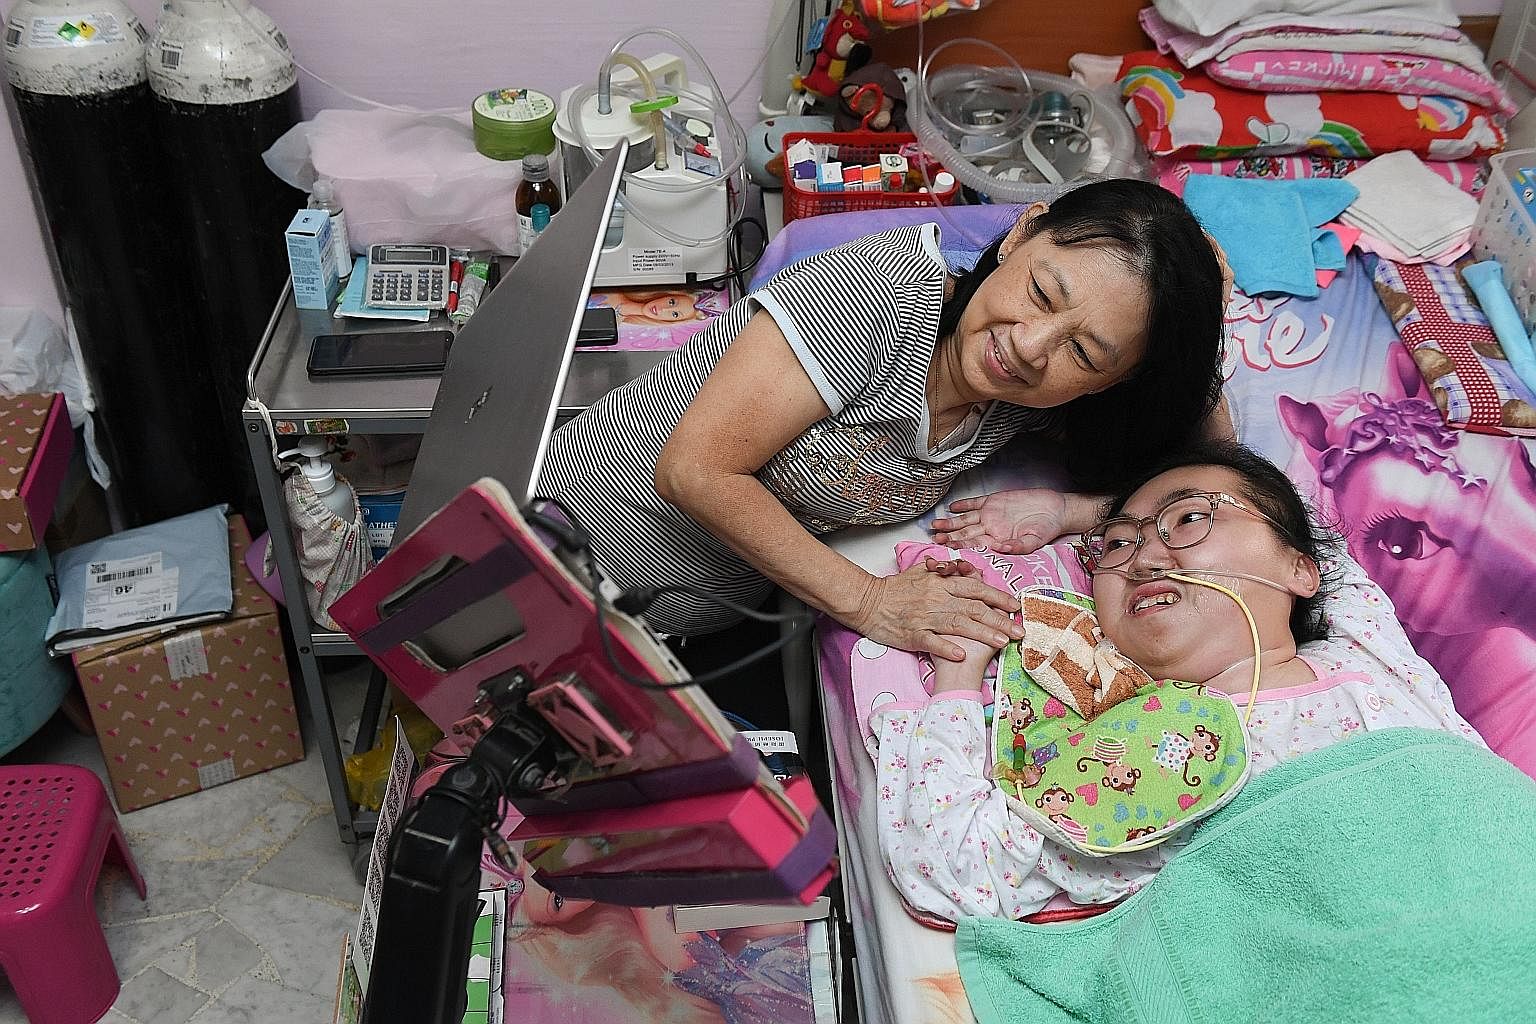 Although she suffers from spinal muscular atrophy type 2 and is confined to her bed, Miss Vivian Goh, seen here with her mother Ivy Yong, is able to run an online business, play online games, watch YouTube videos and attend online church services on 